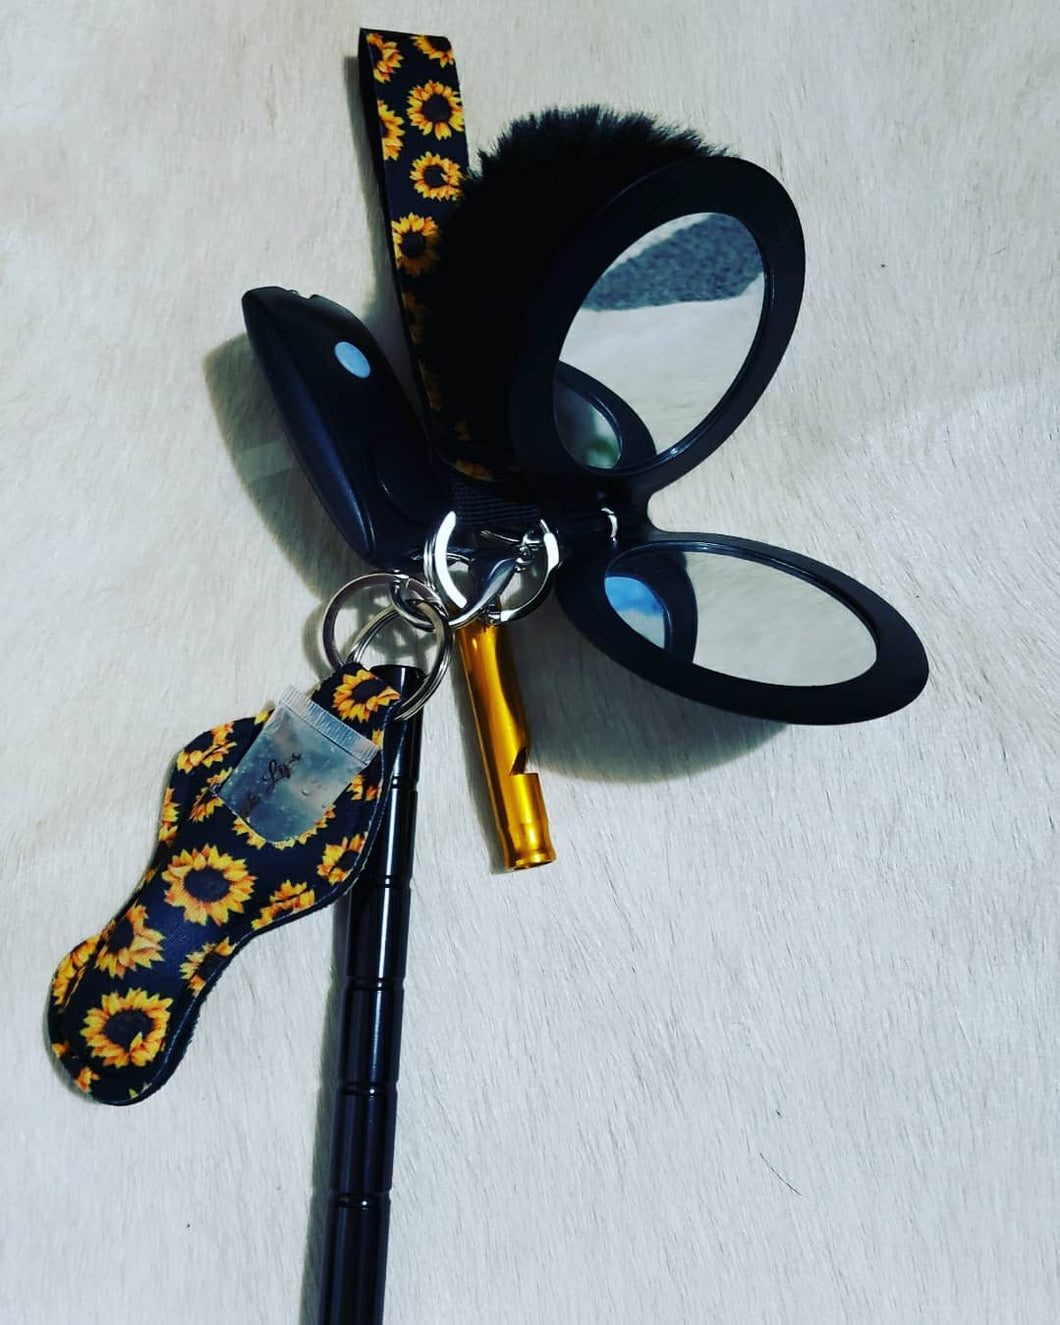 Teal and black Self Defense Keychain Combo Set